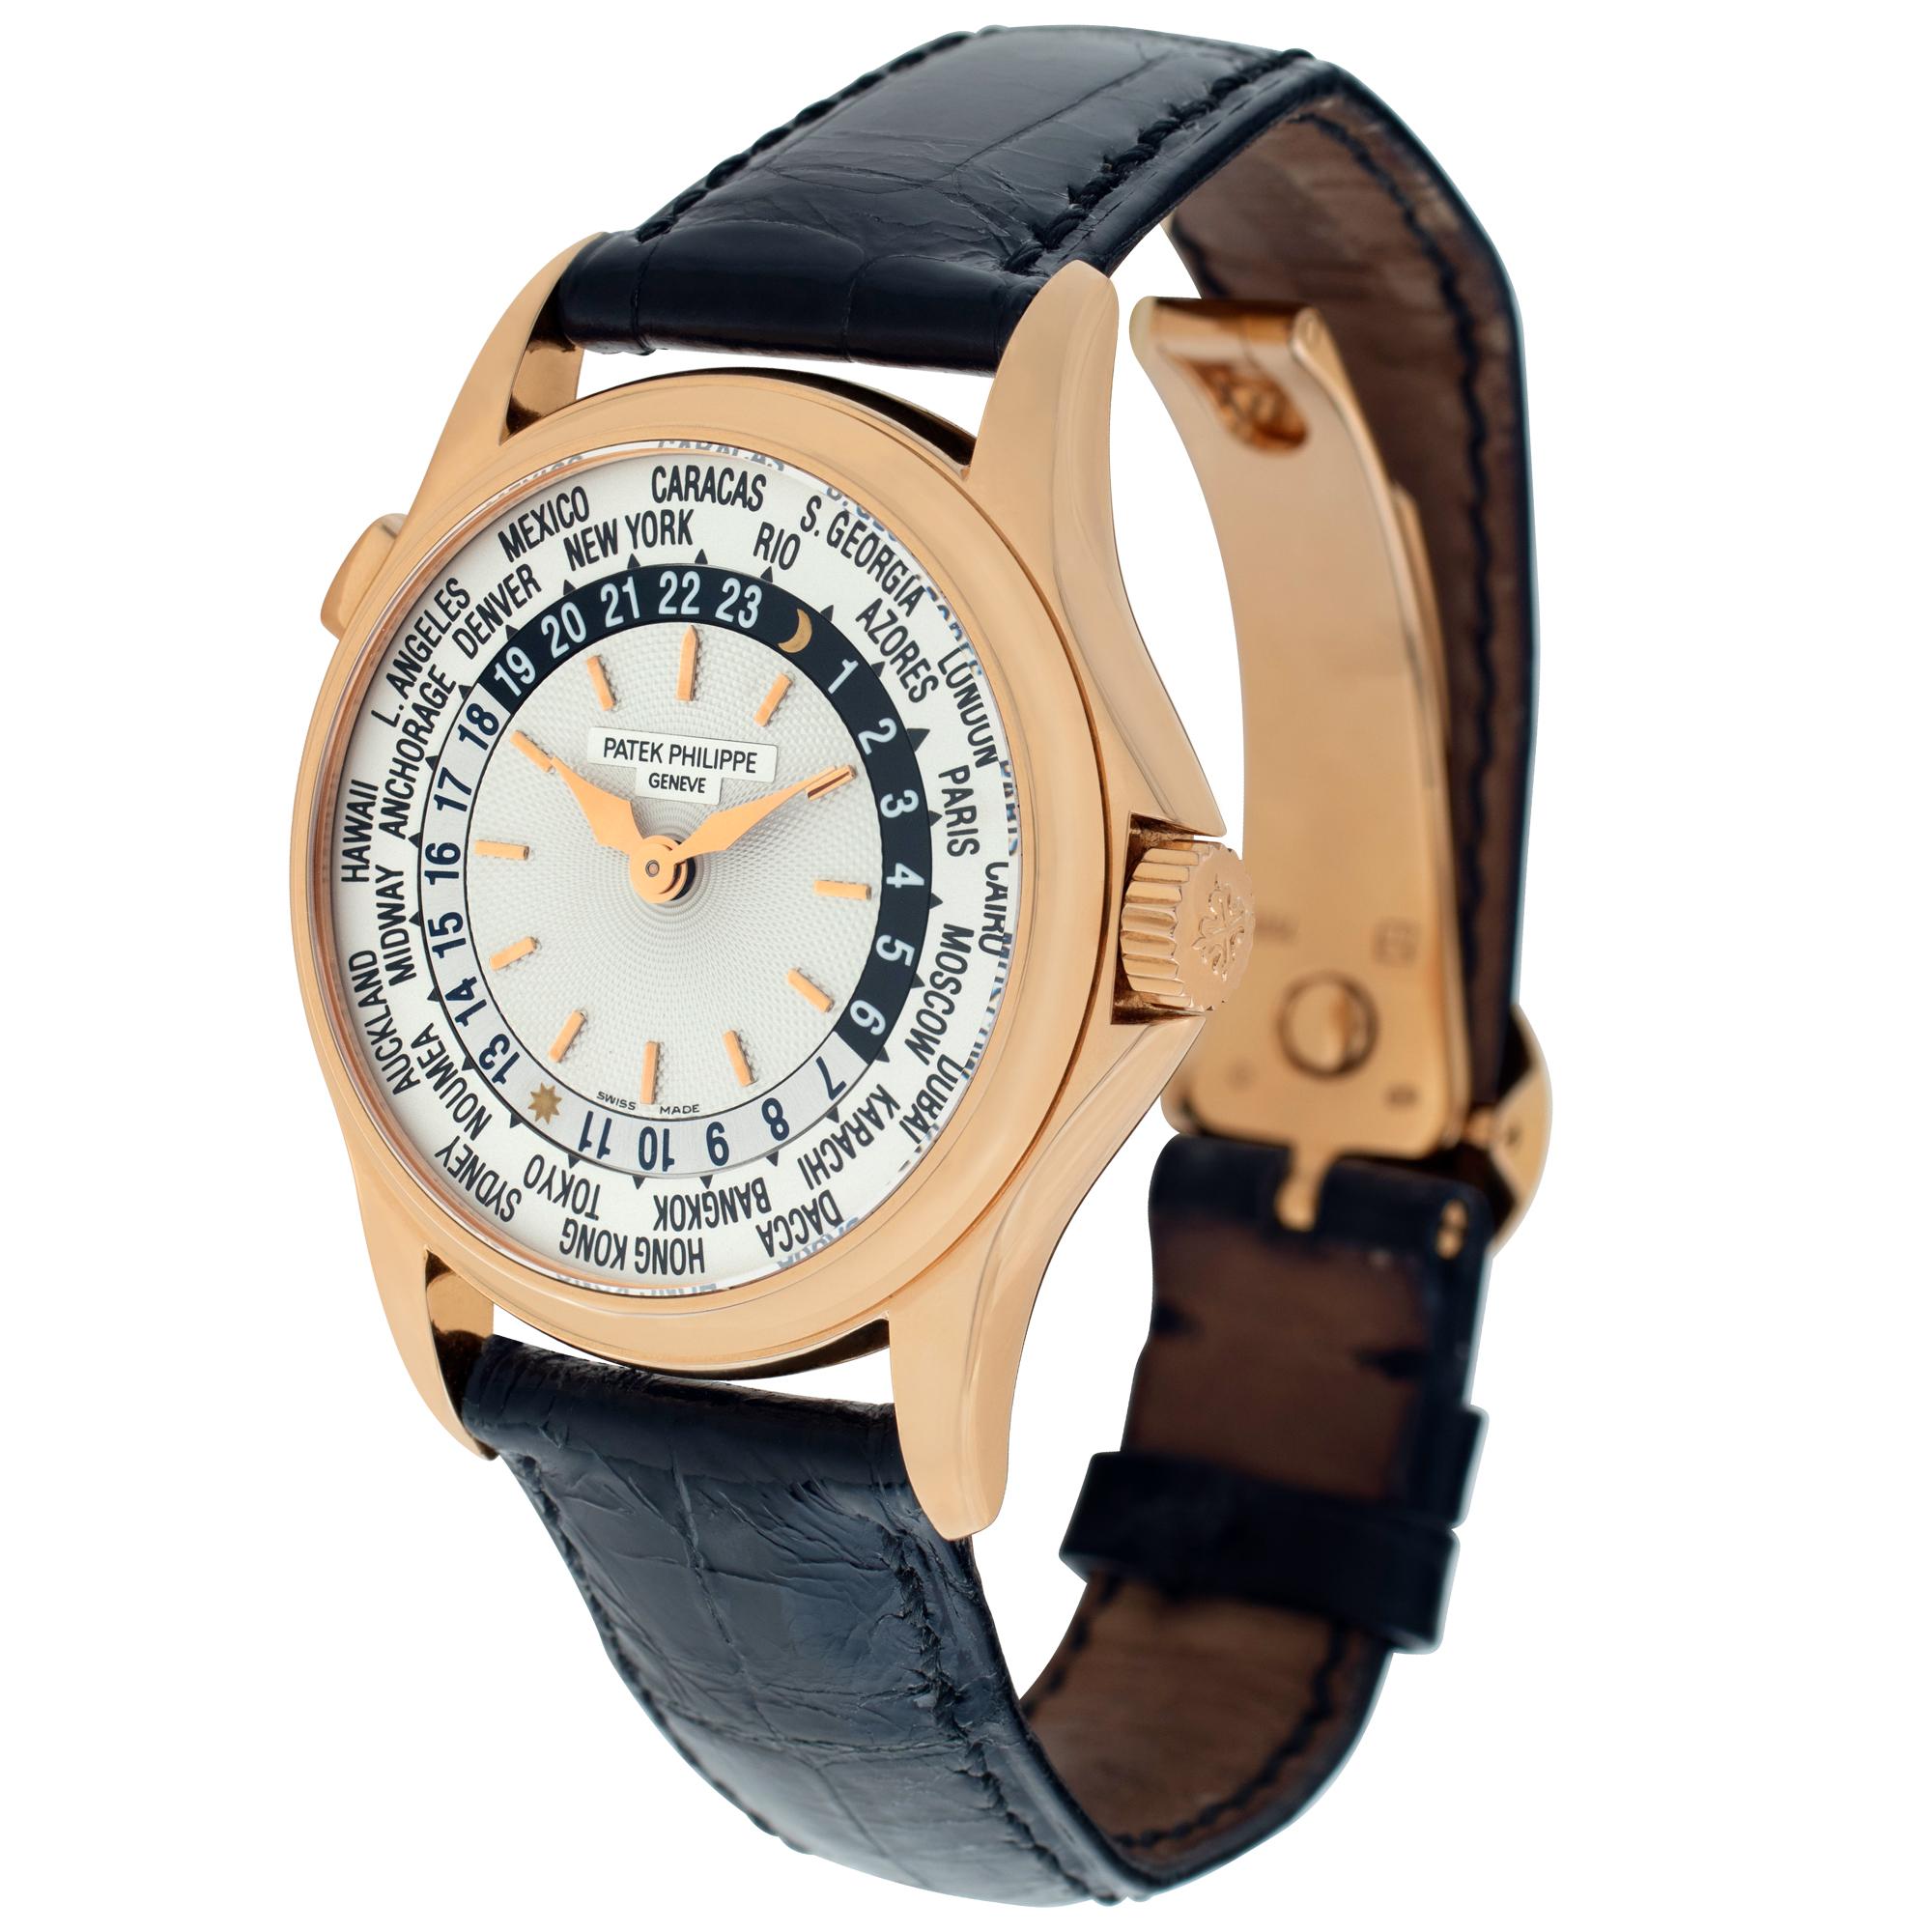 Patek Philippe World Time in 18k rose gold on a black alligator strap with deployant buckle. Auto movement under glass with world time. 37 mm case size. Ref 5110r. Circa 2000s. Fine Pre-owned Patek Philippe Watch. Certified preowned Dress Patek